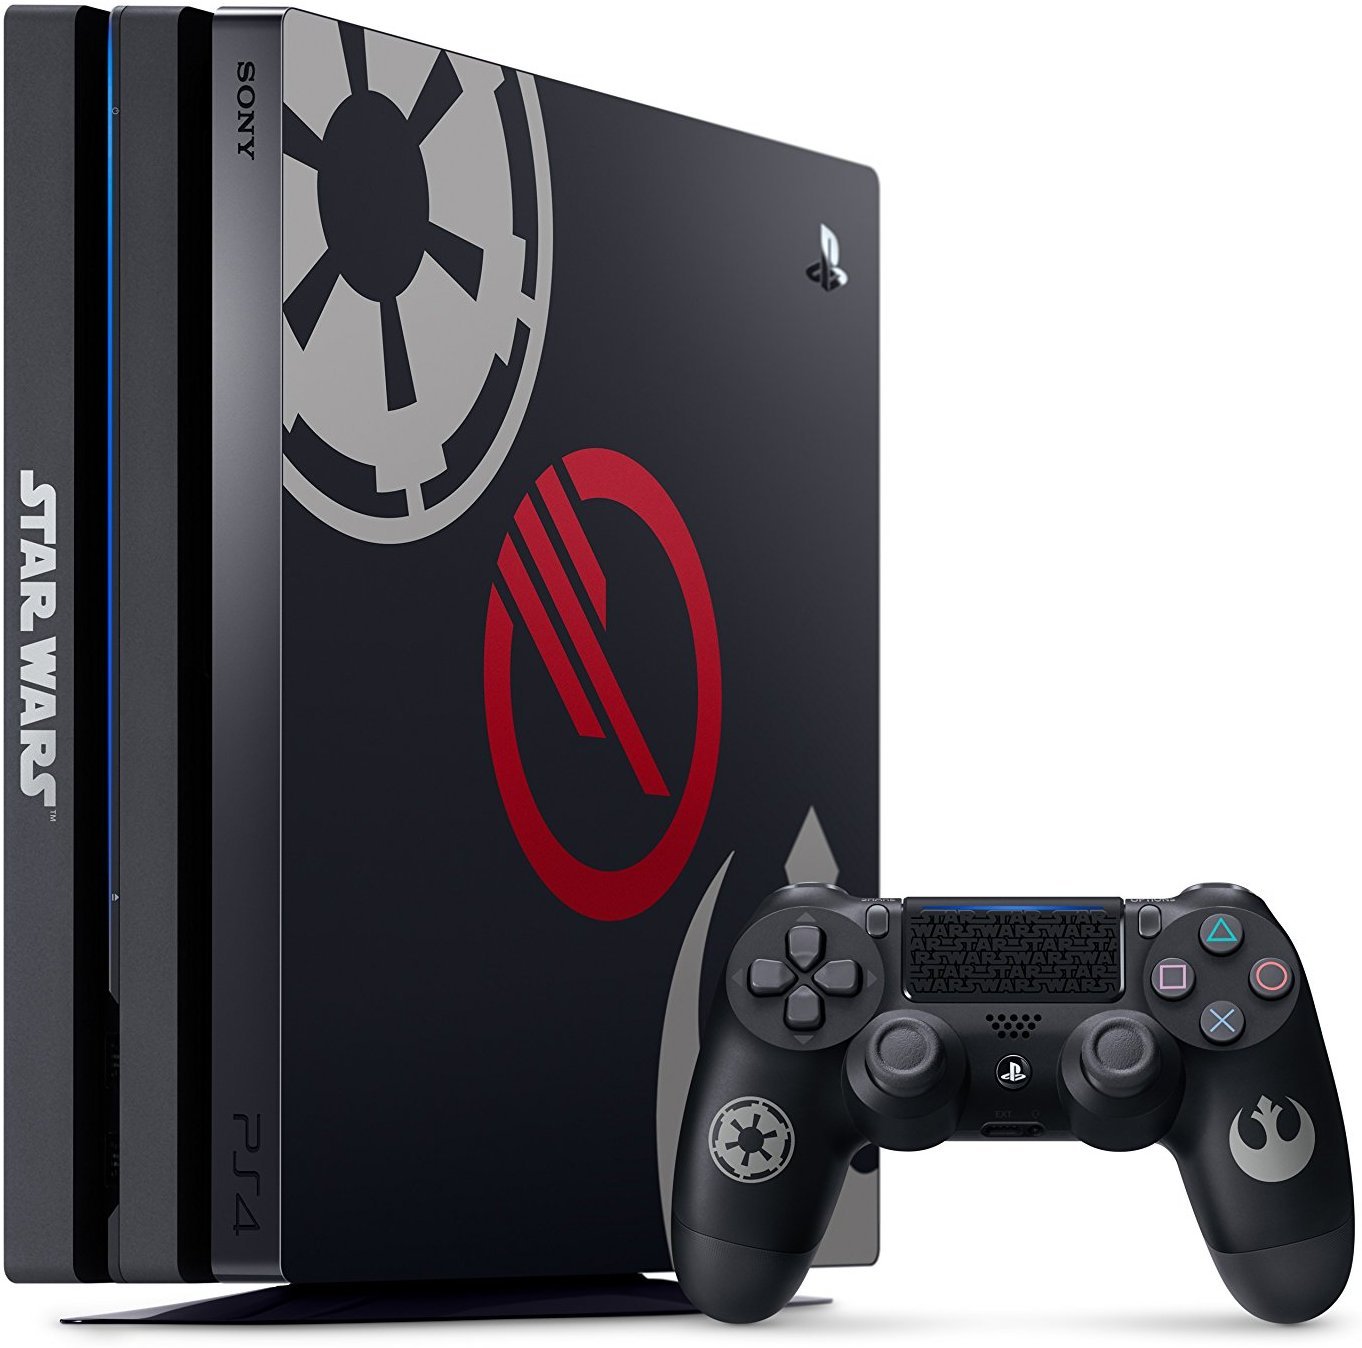 Stare Wars Battlefront 2 PS4 Pro